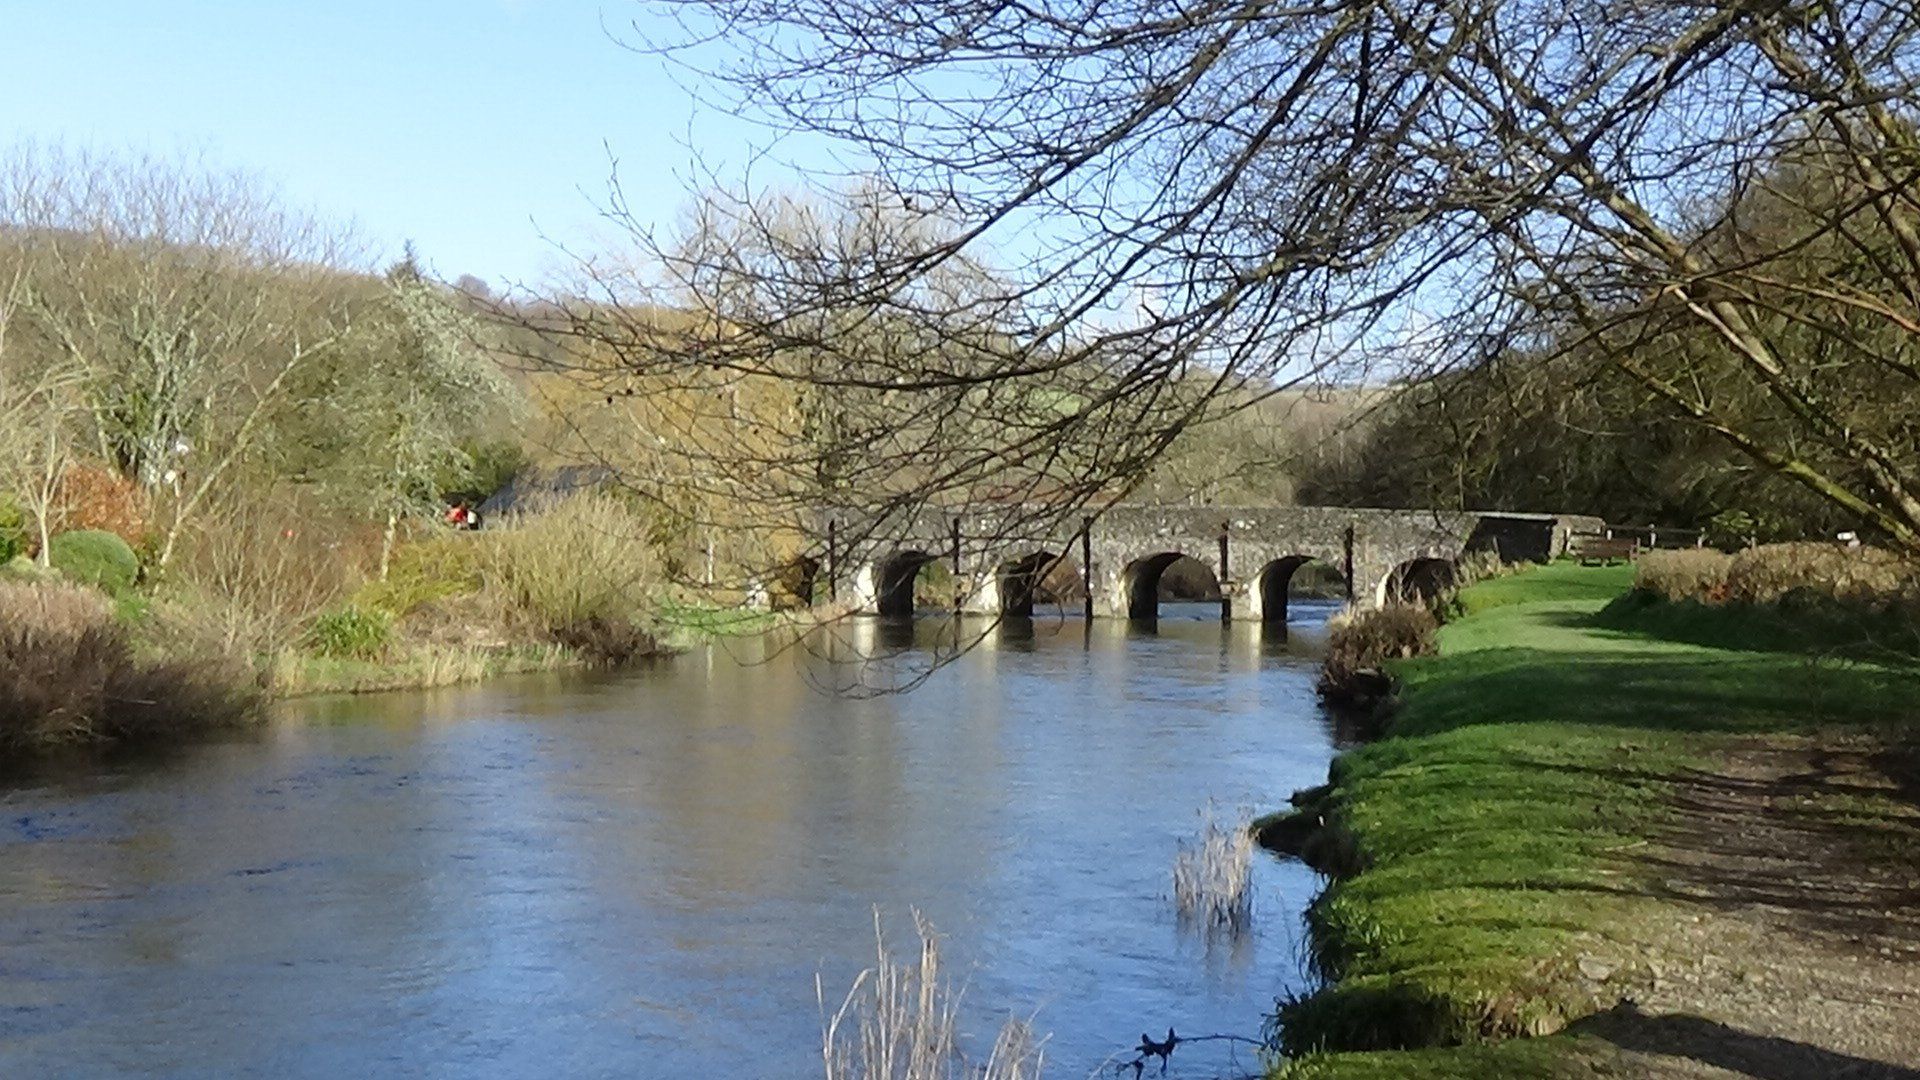 River Barle and the six arched bridge